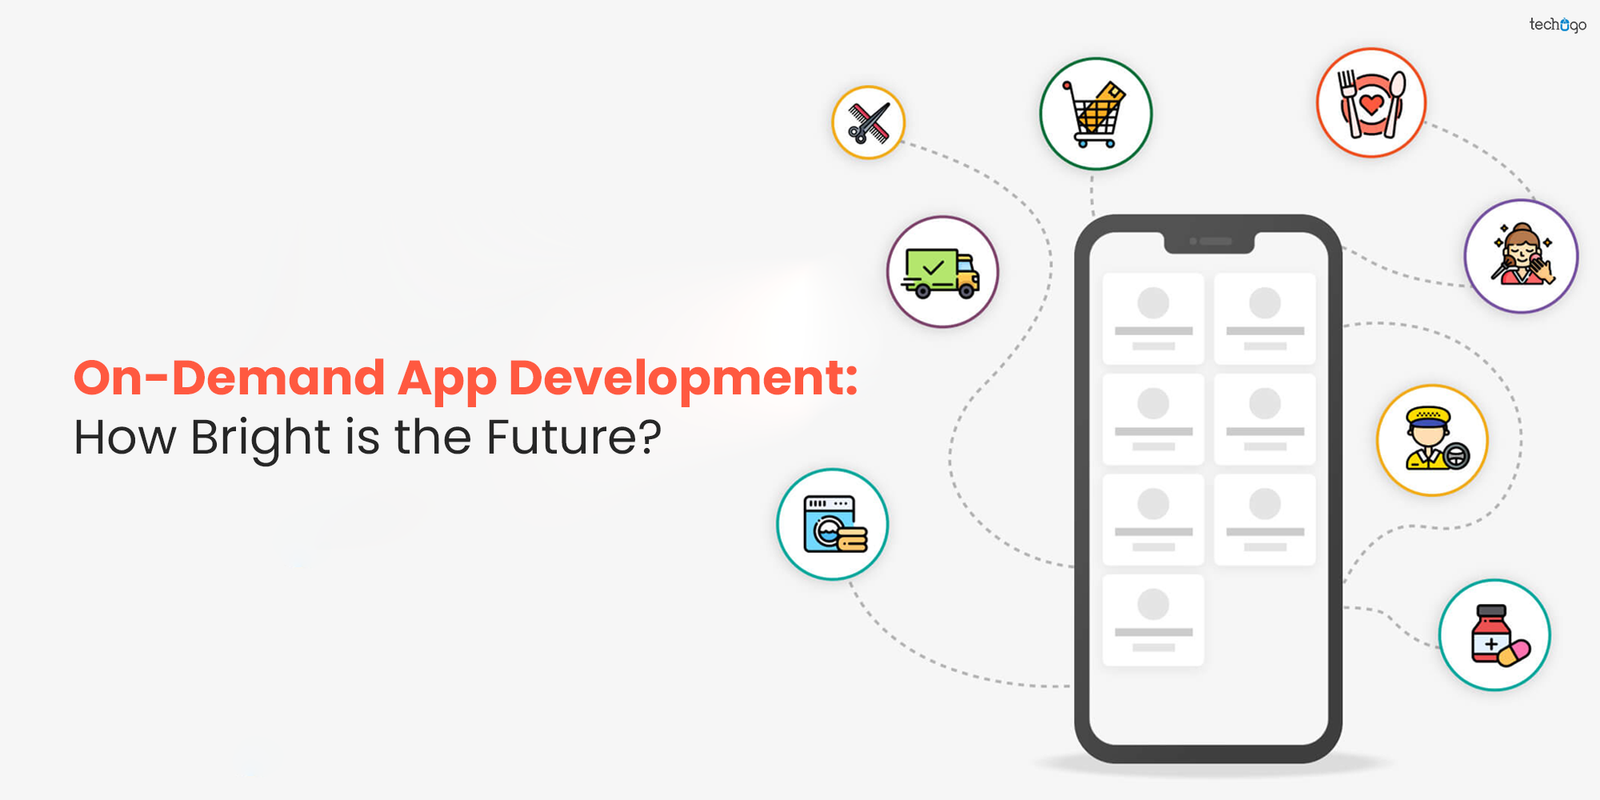 On-Demand App Development: How Bright is the Future?